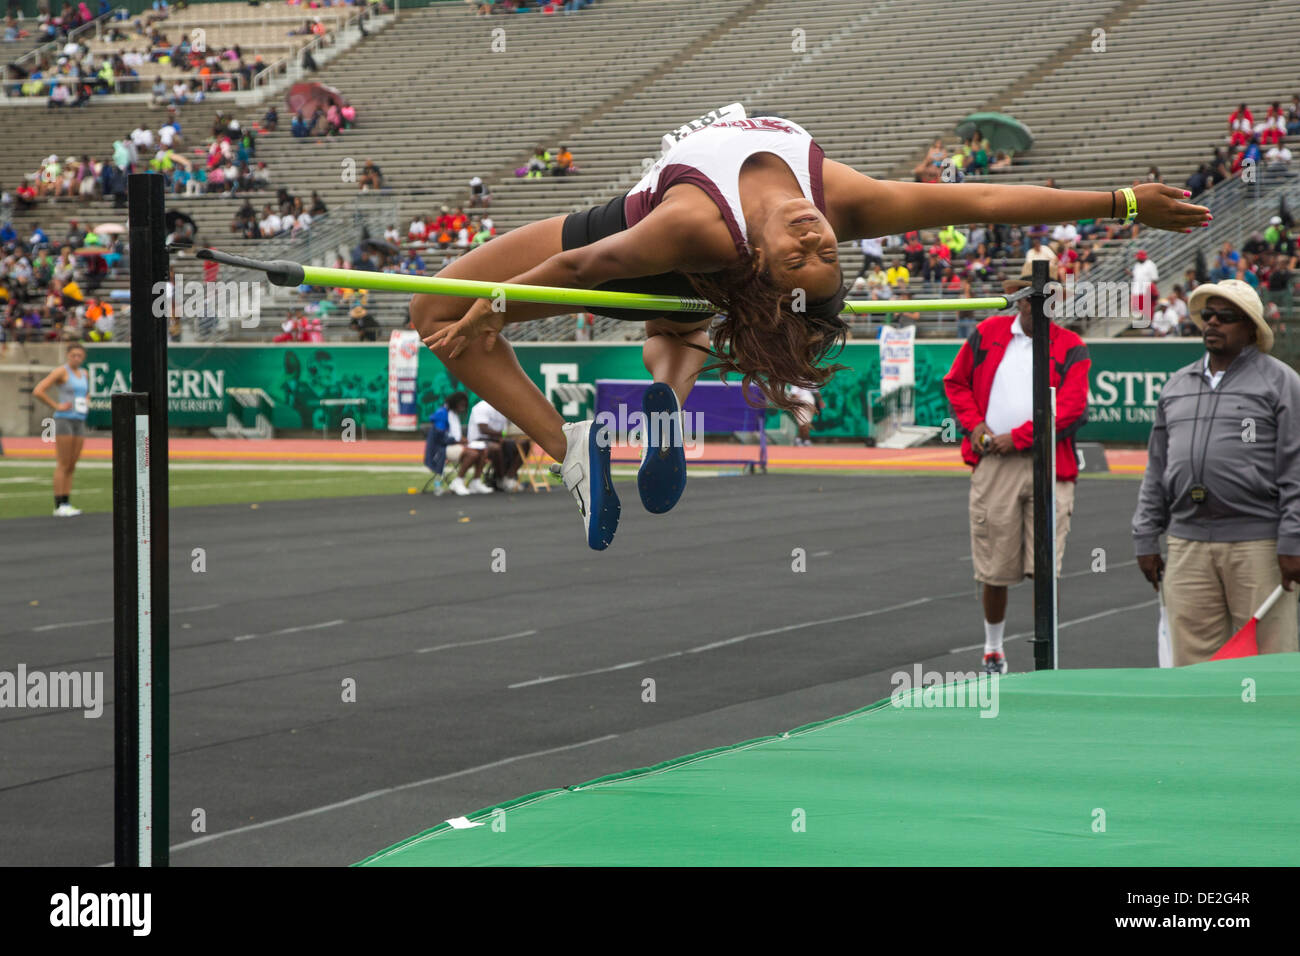 Ypsilanti, Michigan - High jump competition during the track and field events at the AAU Junior Olympic Games. Stock Photo